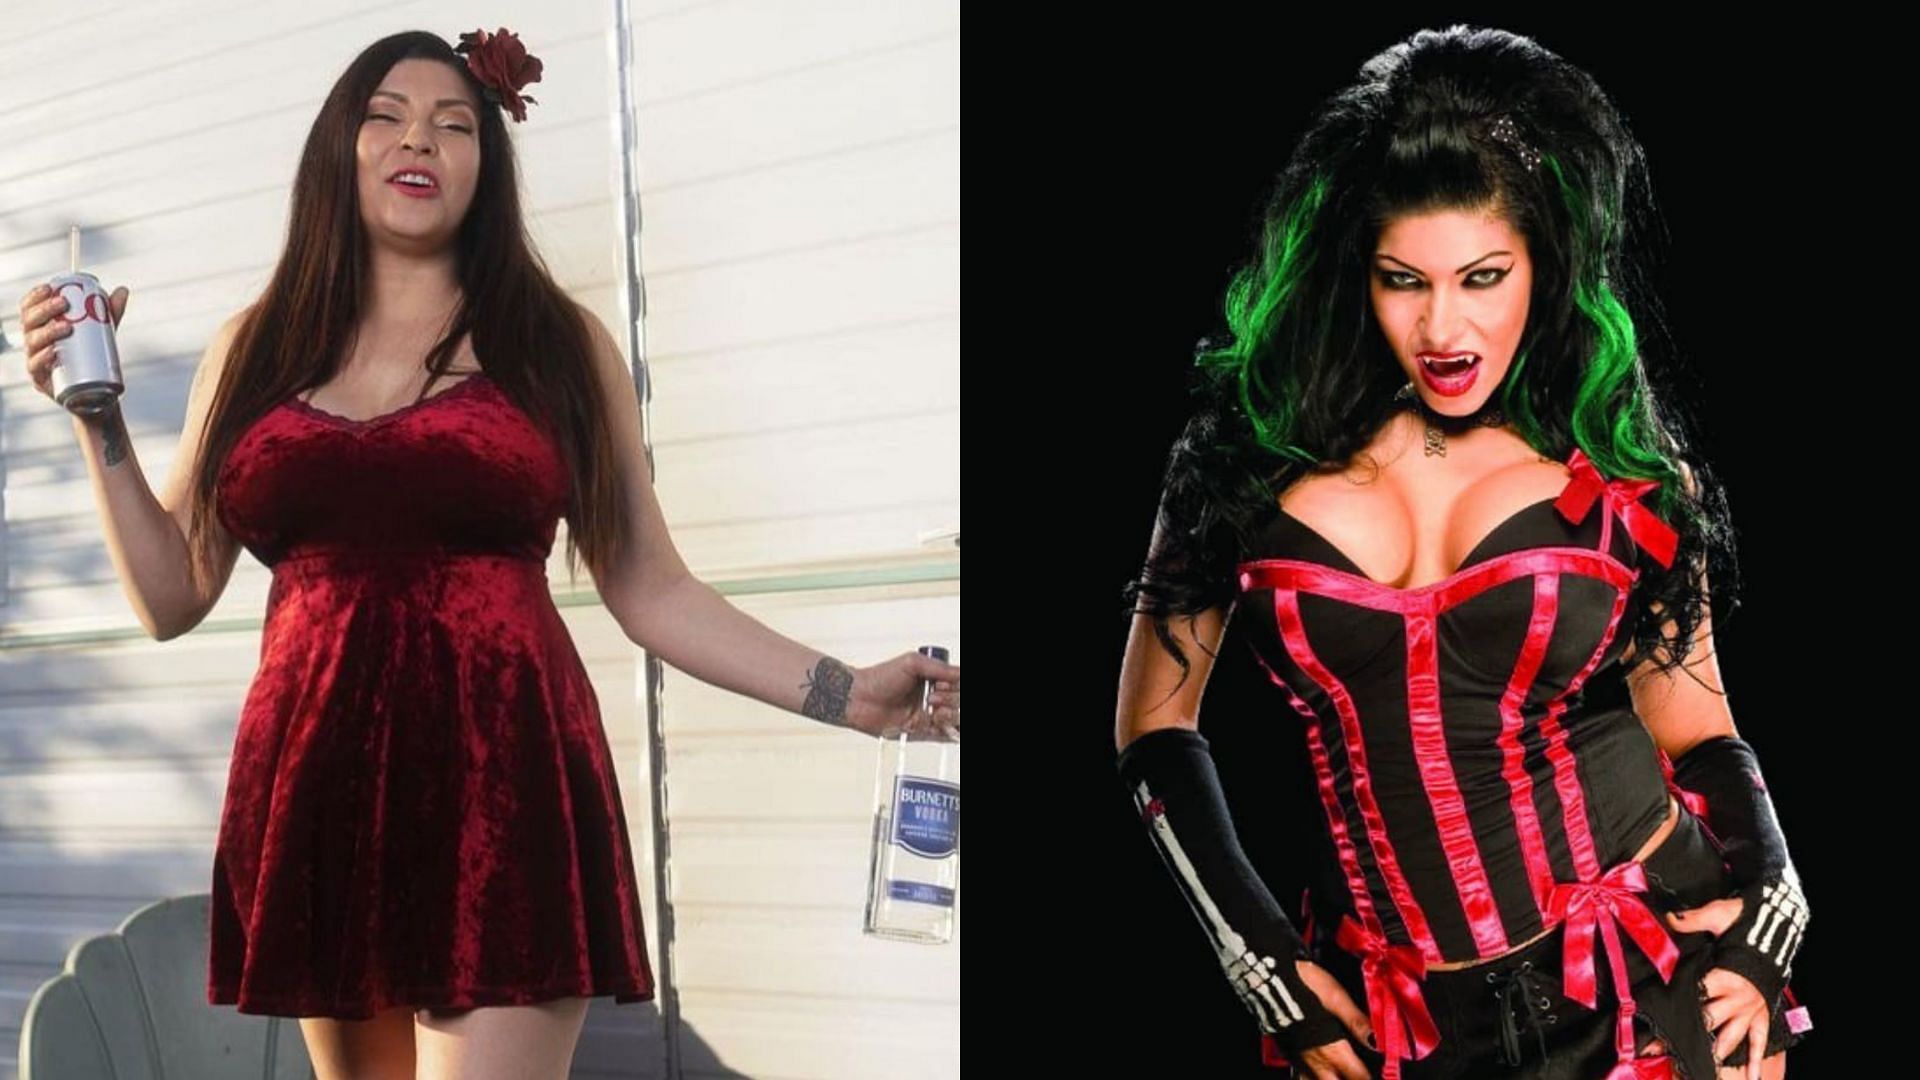 Shelly Martinez has retired from wrestling